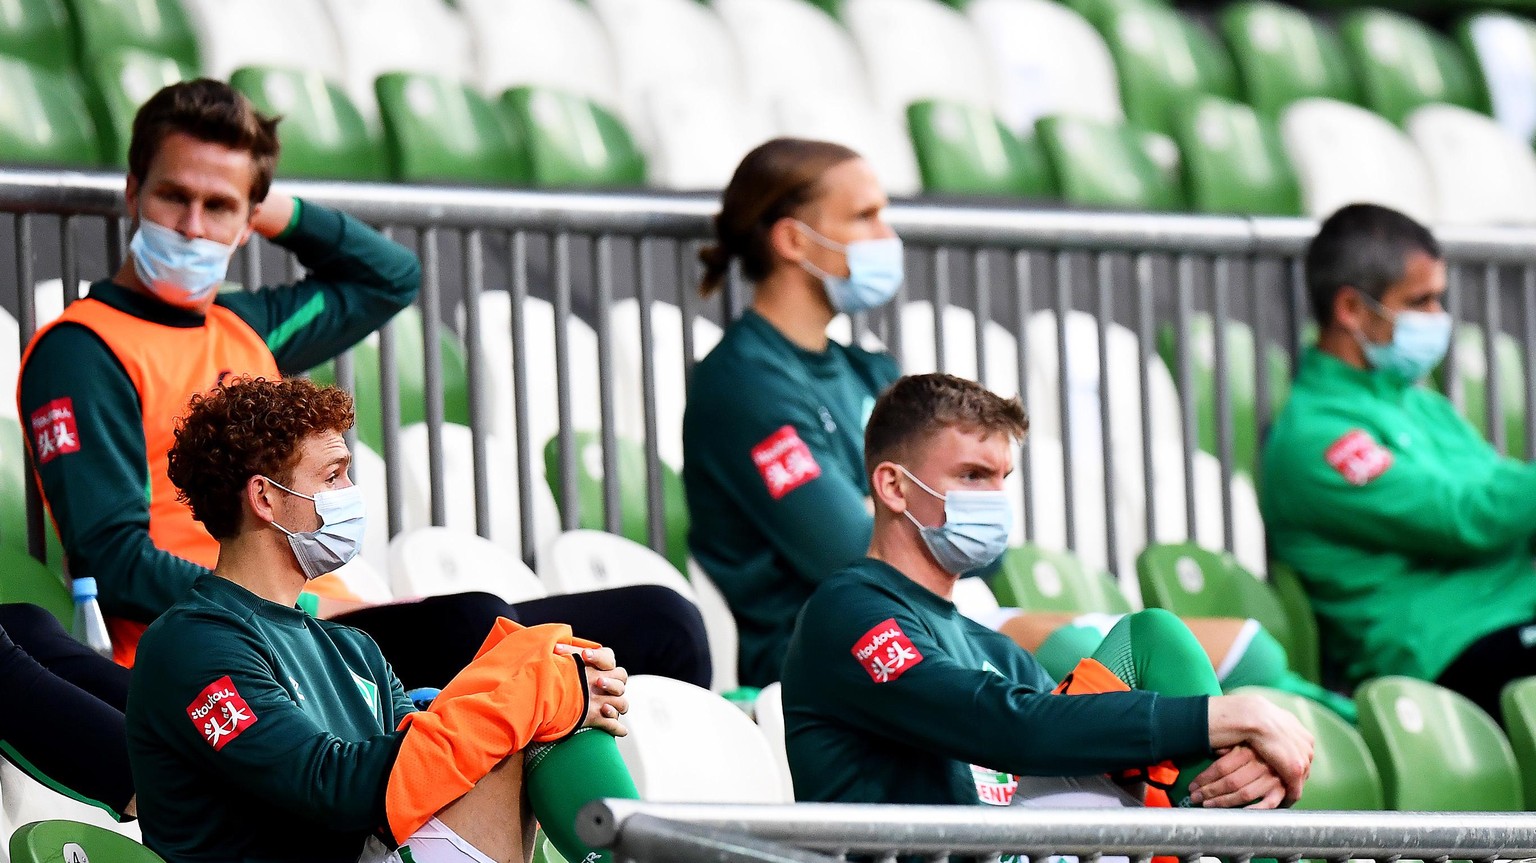 epa08430815 Players of Werder Bremen wearing protective face masks sit on the bench during the German Bundesliga soccer match between SV Werder Bremen and Bayer 04 Leverkusen in Bremen, Germany, 18 Ma ...